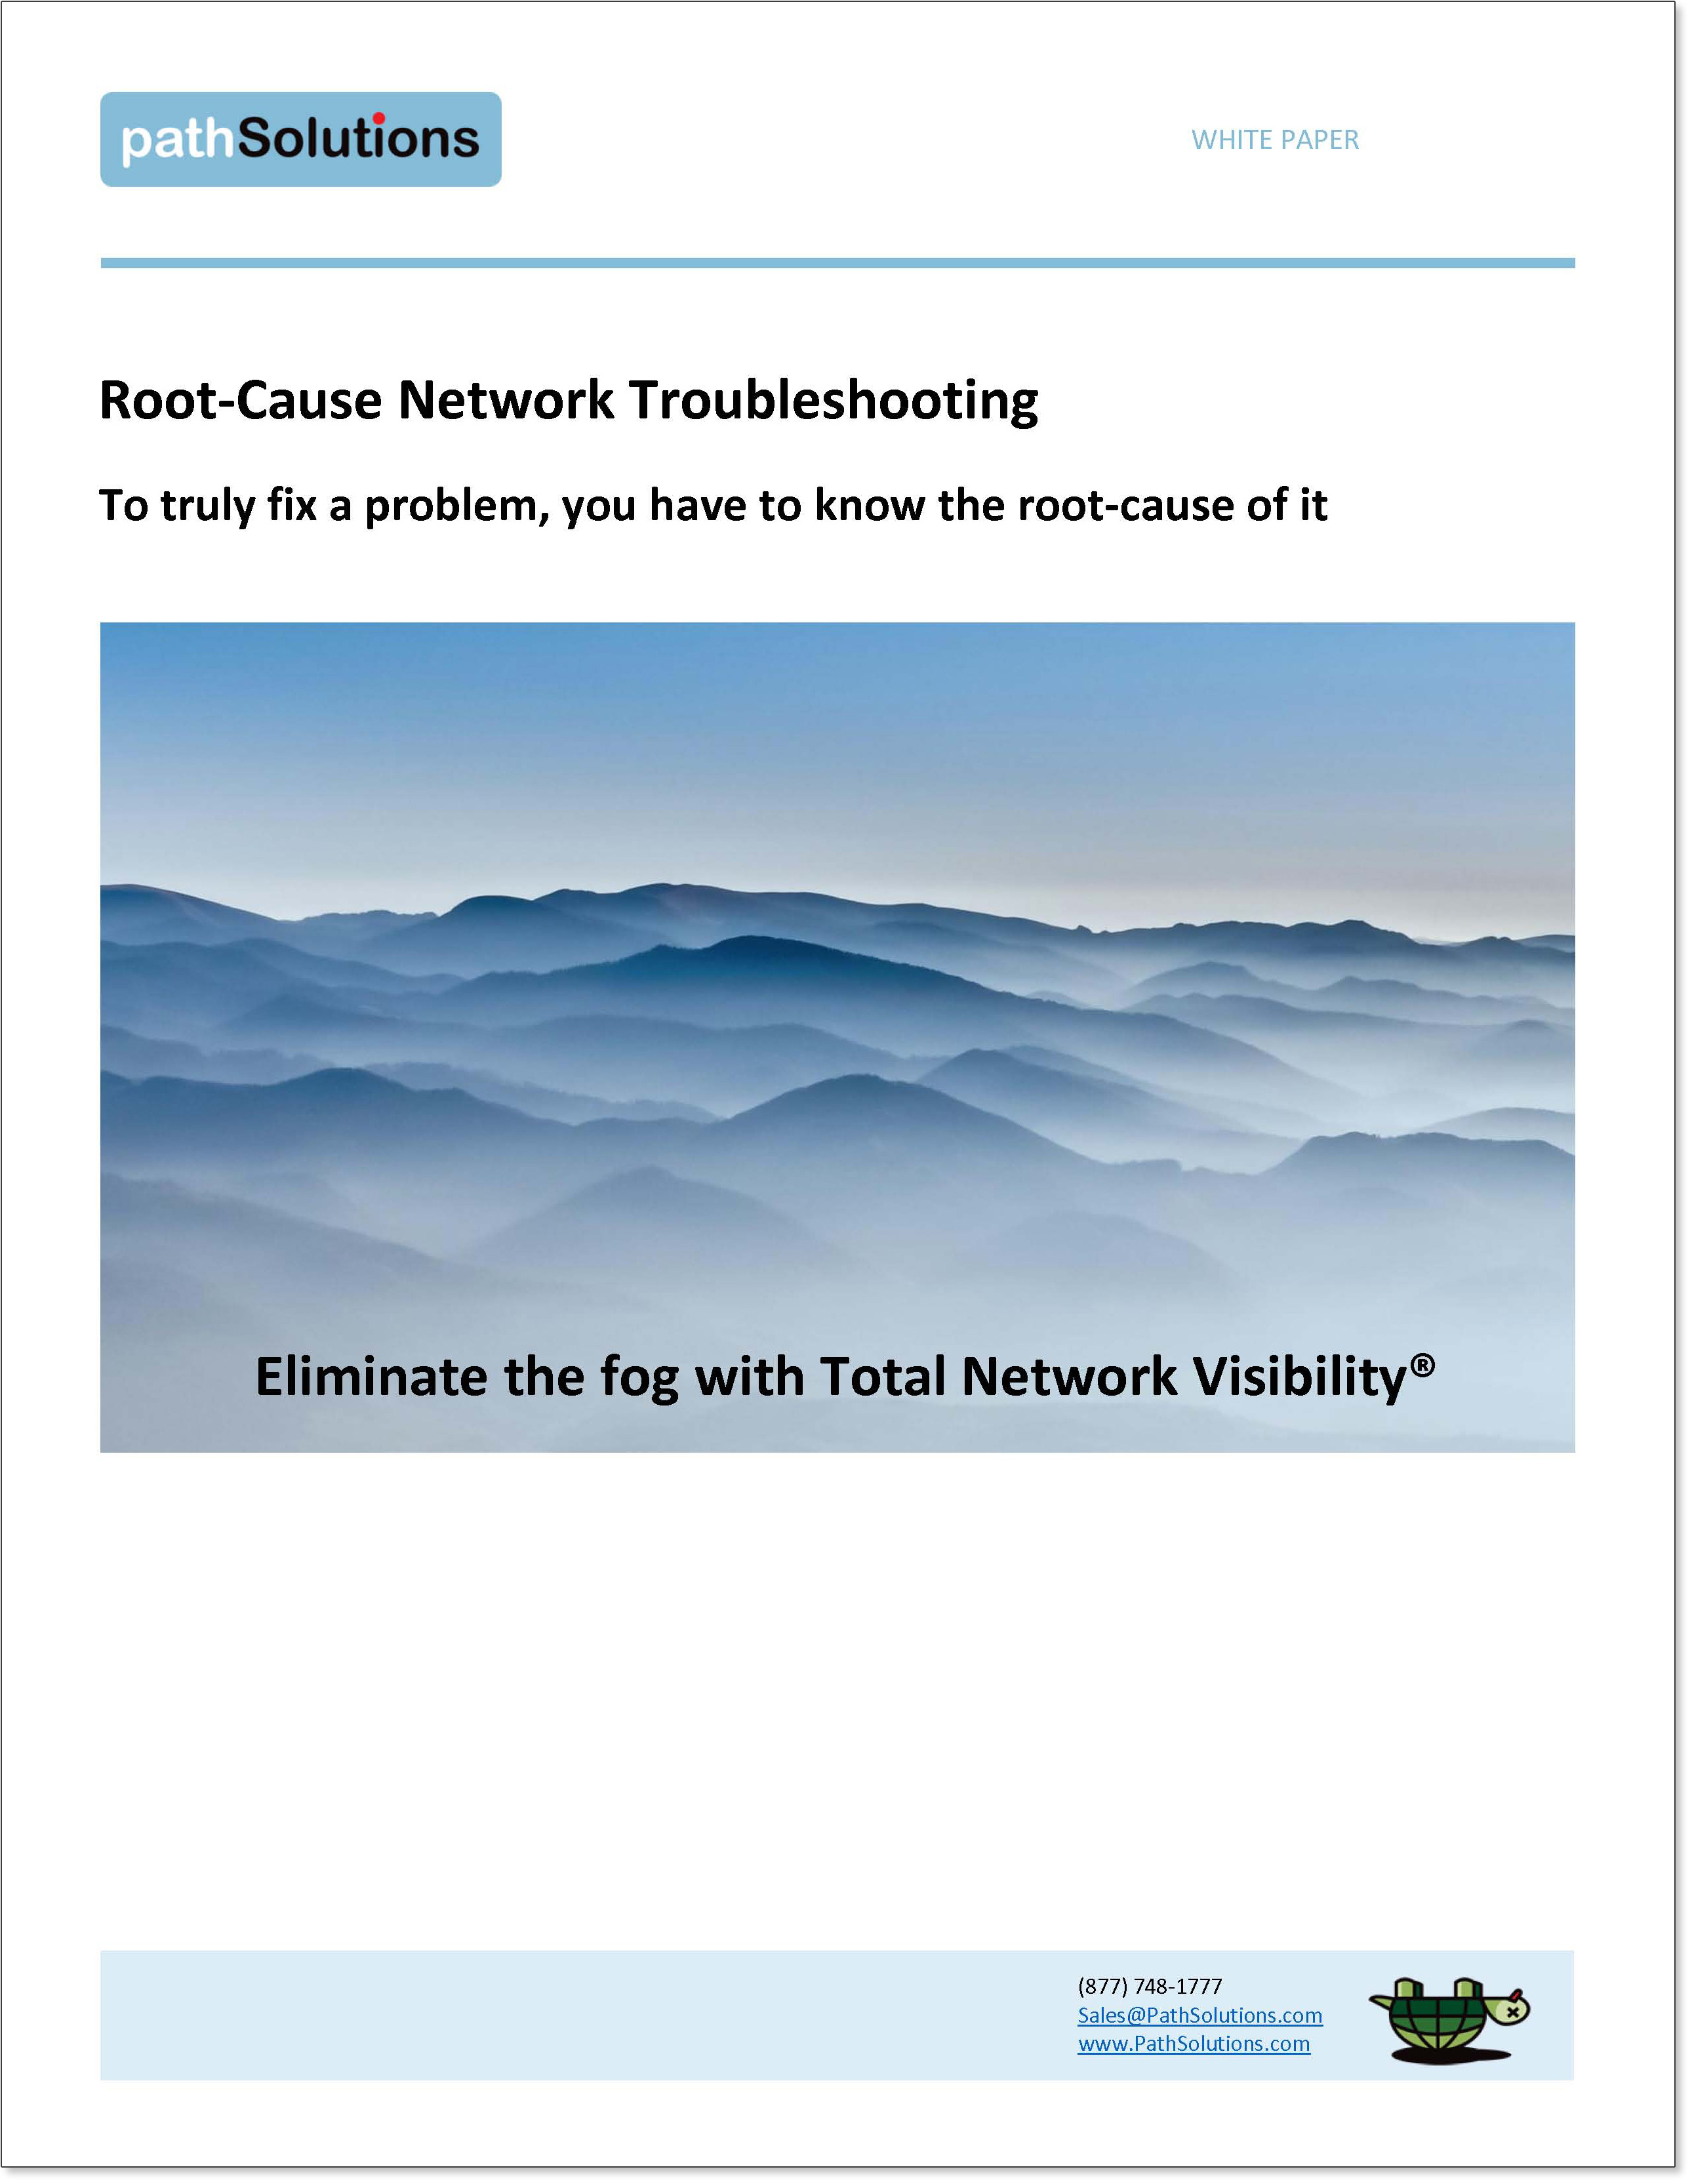 whitepaper-root-cause-network-page_01_lined